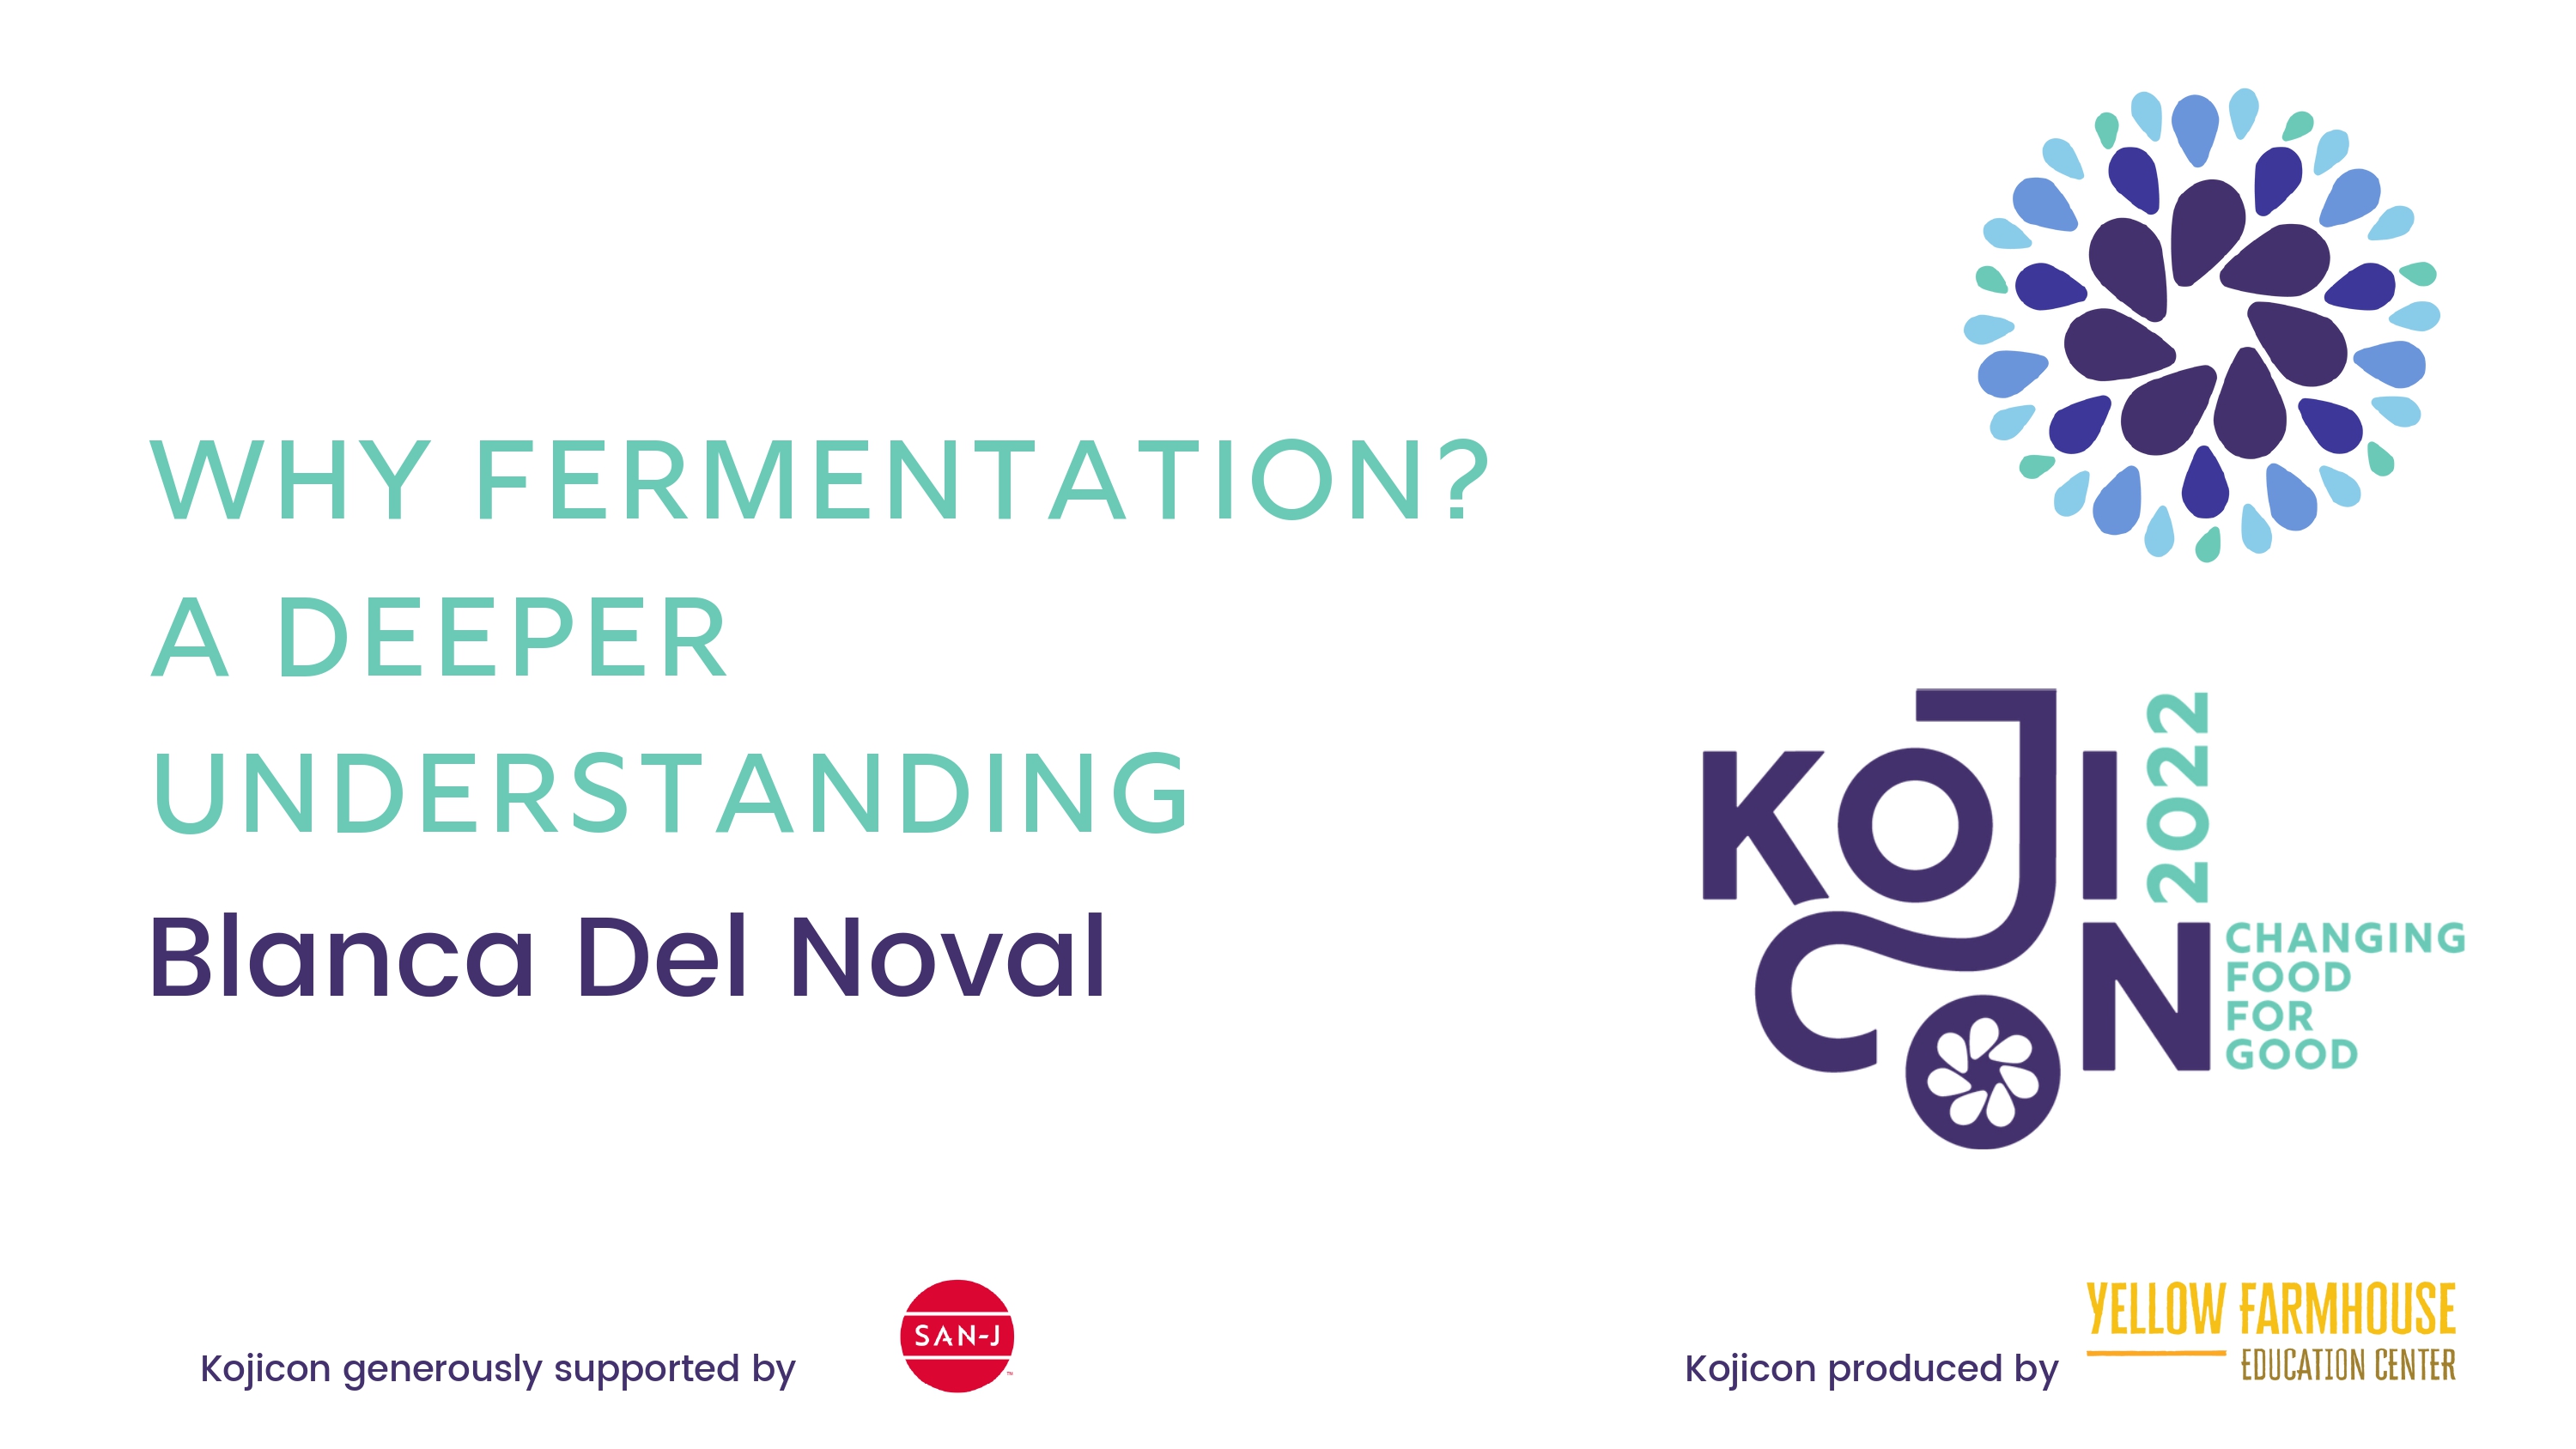 Blanca del Noval: “The fermentation boom calls for knowledge, but also awareness”